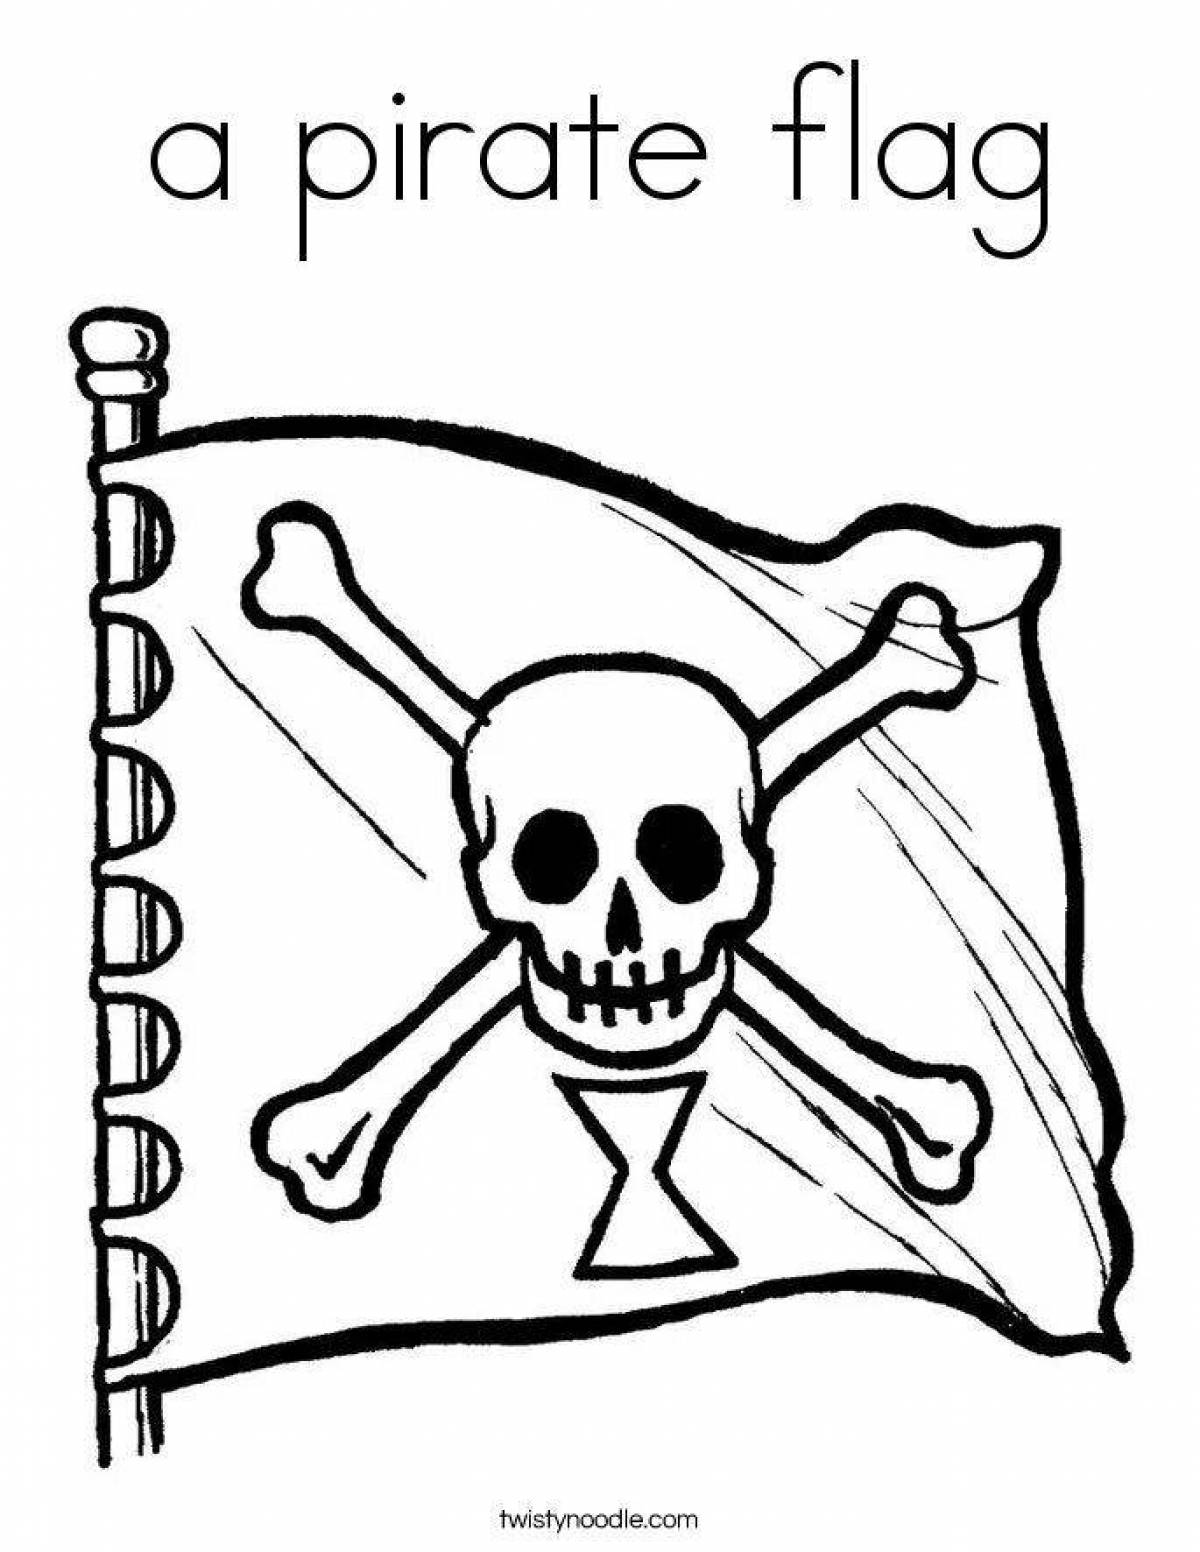 Coloring page jolly roger - elegant